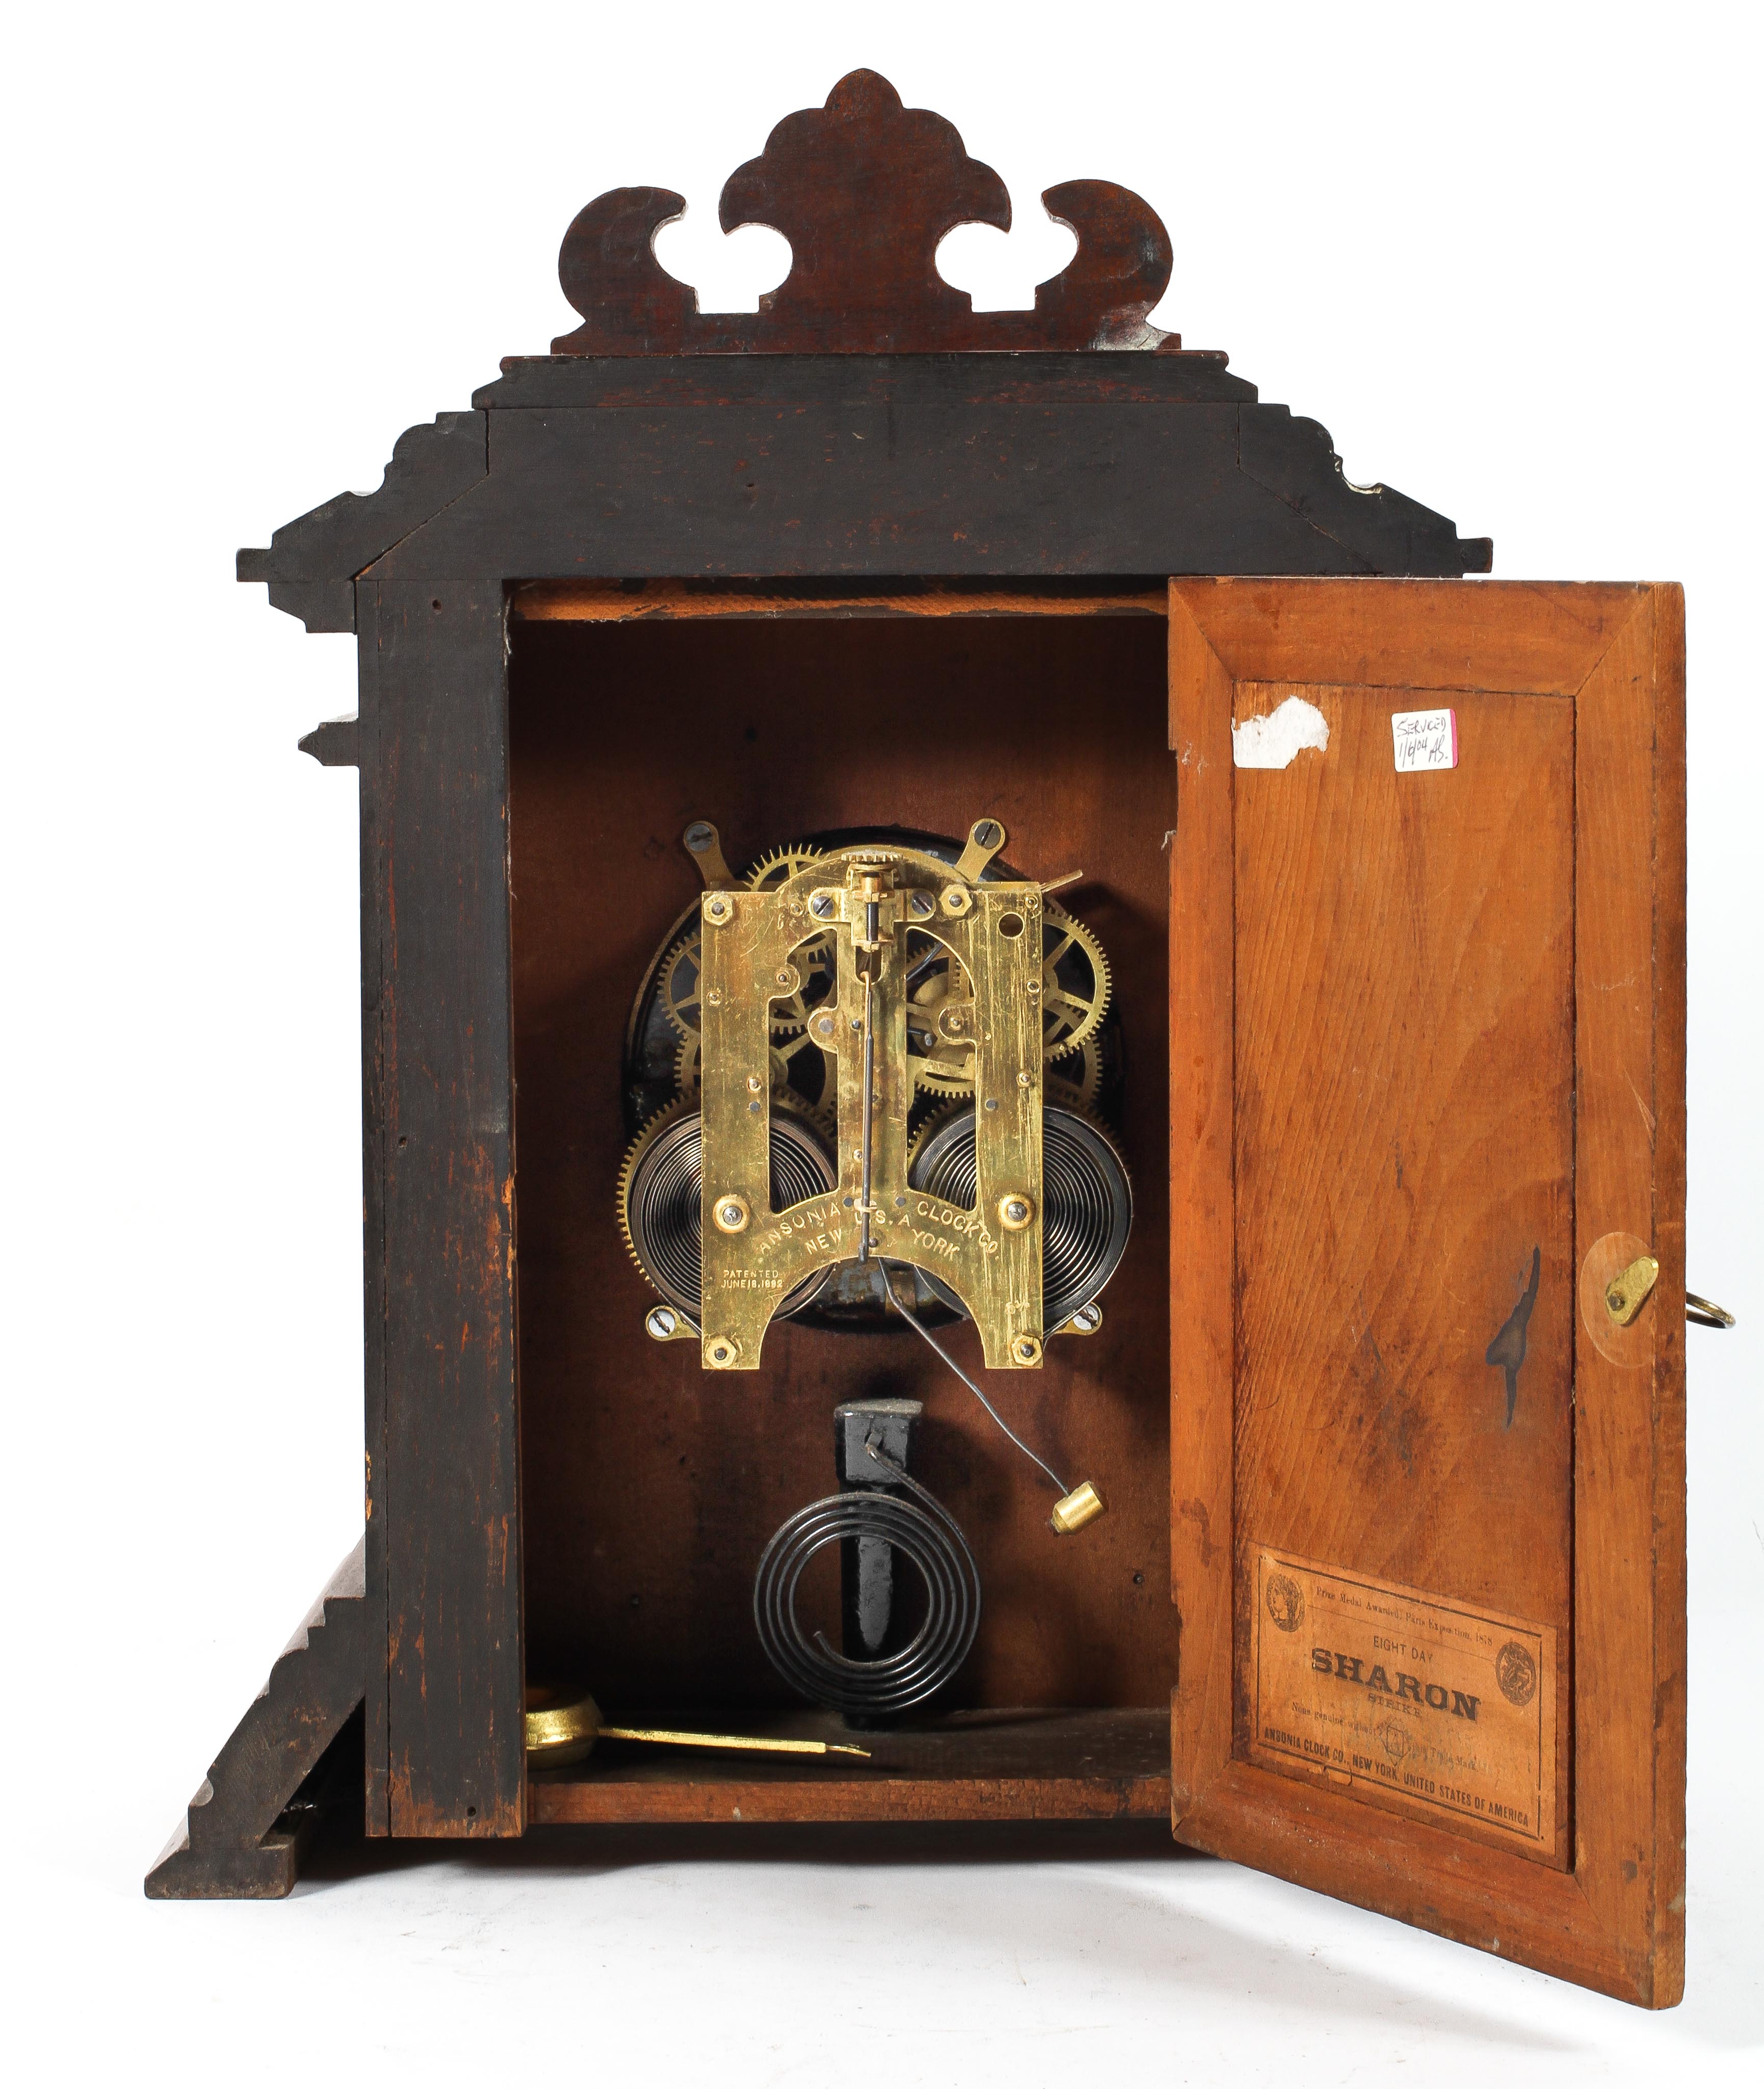 A mahogany cased mantel clock, late 19th century, with a 4 1/2" ivorine dial, - Image 2 of 3